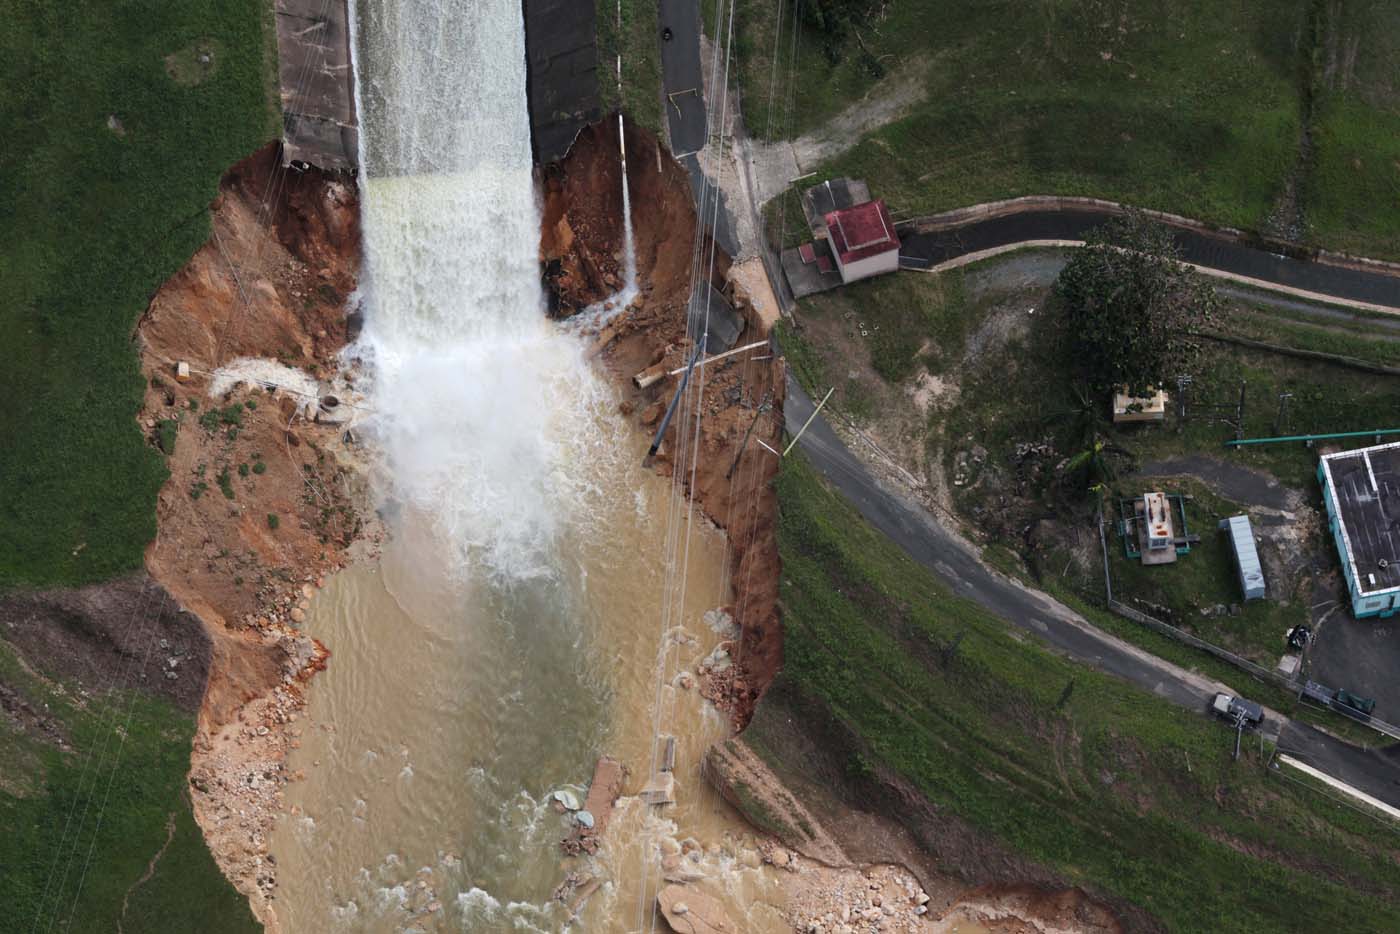 An aerial view shows the damage to the Guajataca dam in the aftermath of Hurricane Maria, in Quebradillas, Puerto Rico September 23, 2017. REUTERS/Alvin Baez TPX IMAGES OF THE DAY